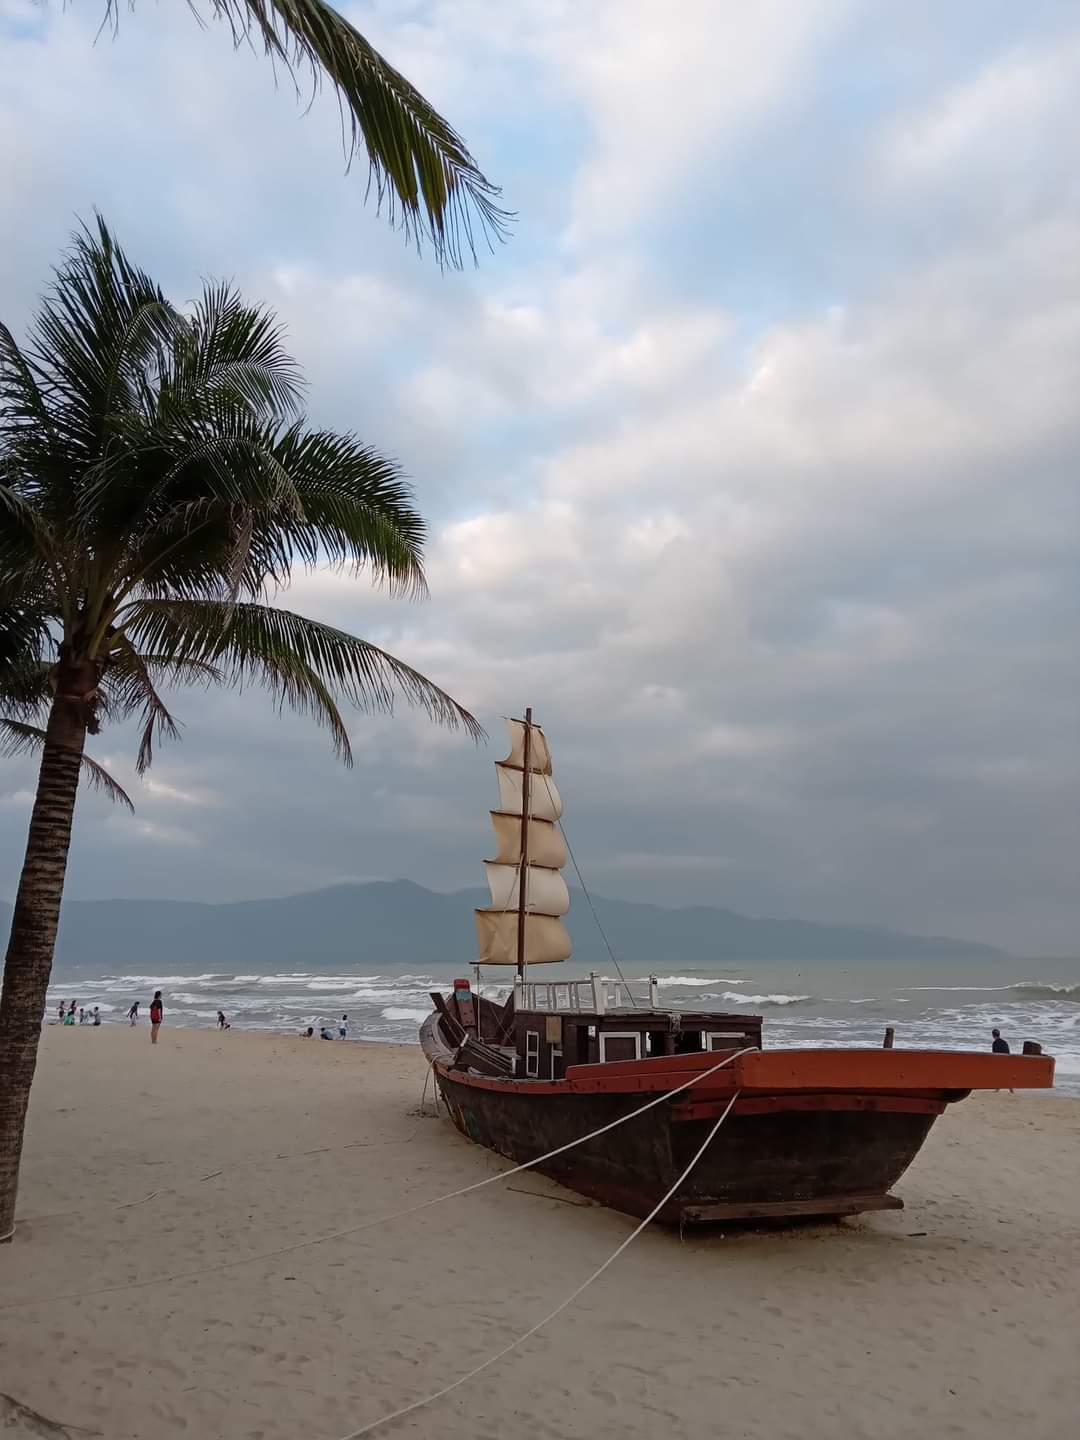 Pirate ship on Da Nang beach in Vietnam, palm tree in the foreground and ocean in the background